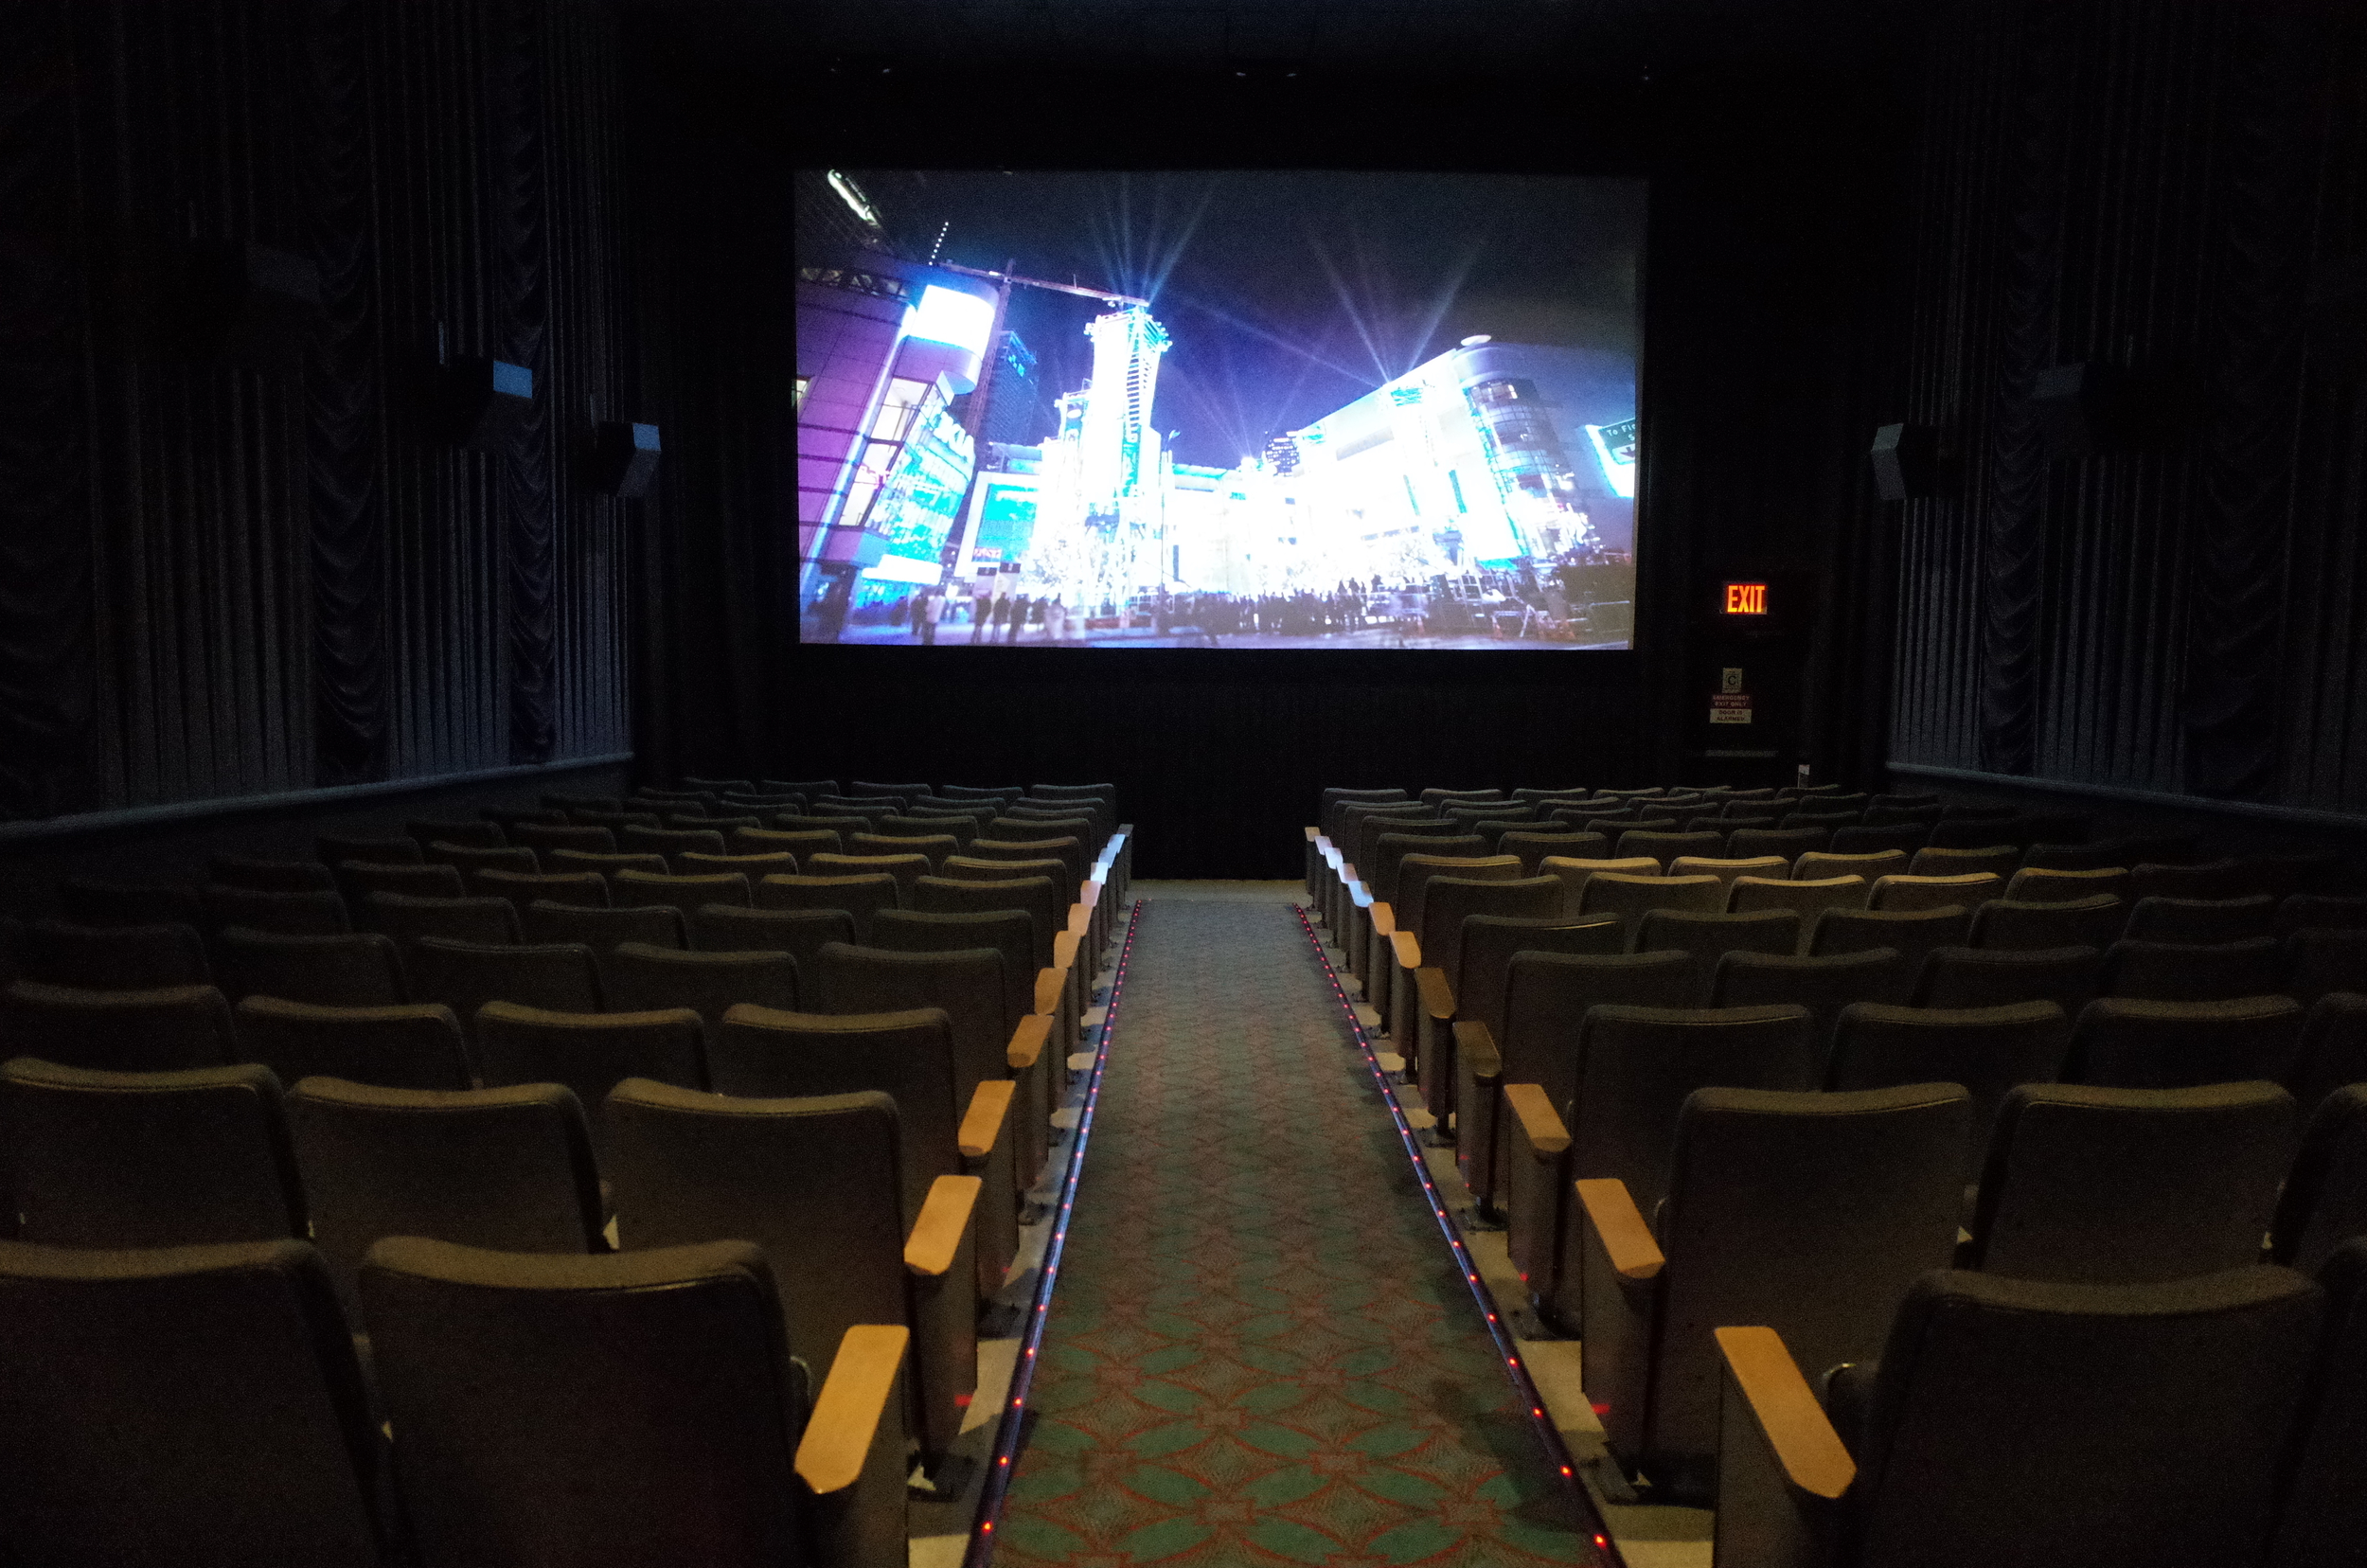  Top floor of the 3rd avenue AMC. How long could someone live up here before anyone noticed? 